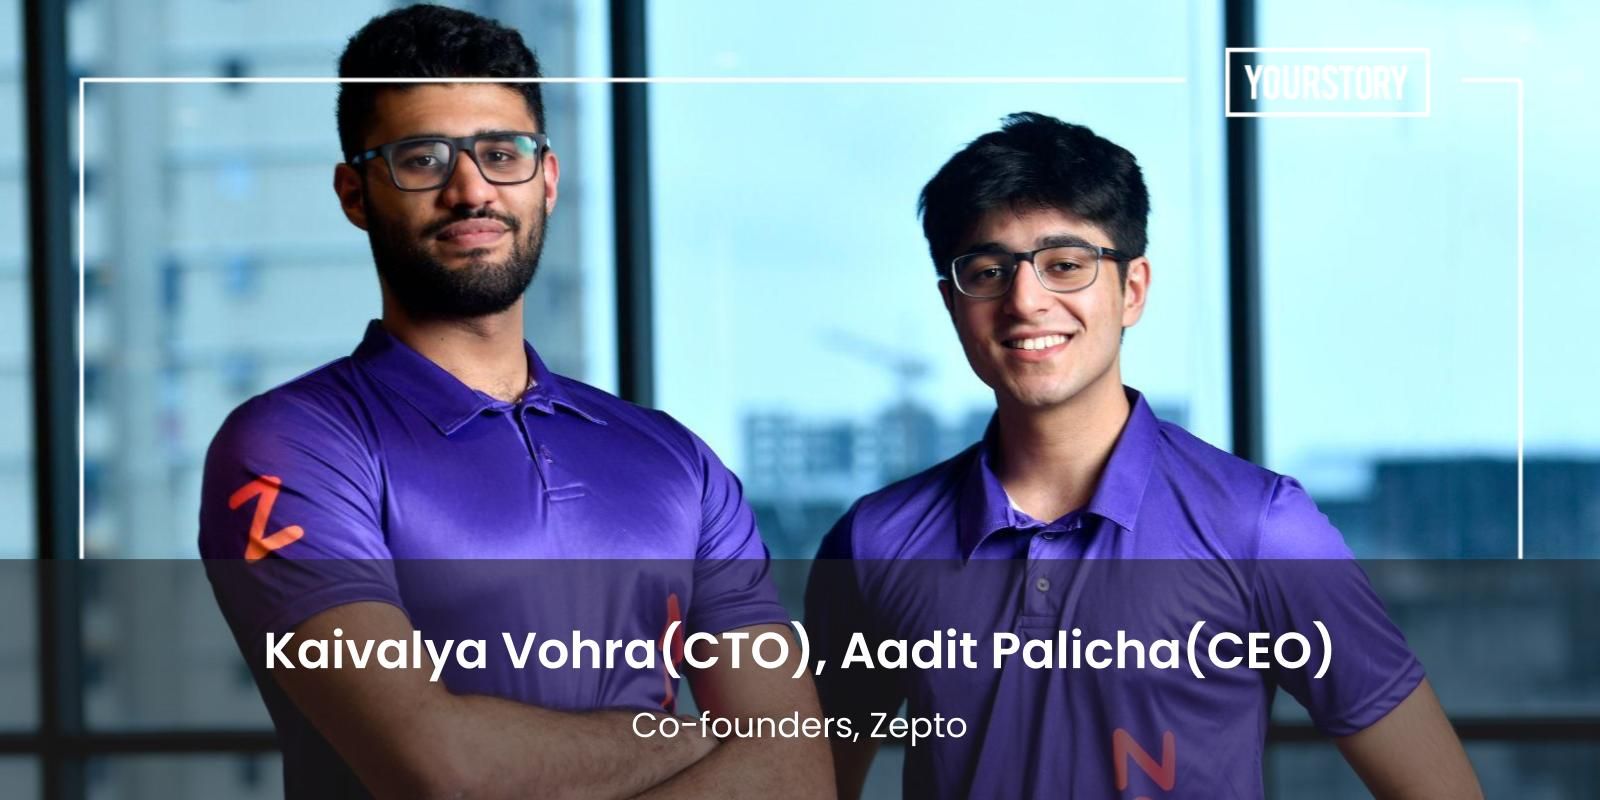 [Jobs Roundup] These openings may help you land a role at 10-minute grocery delivery startup Zepto